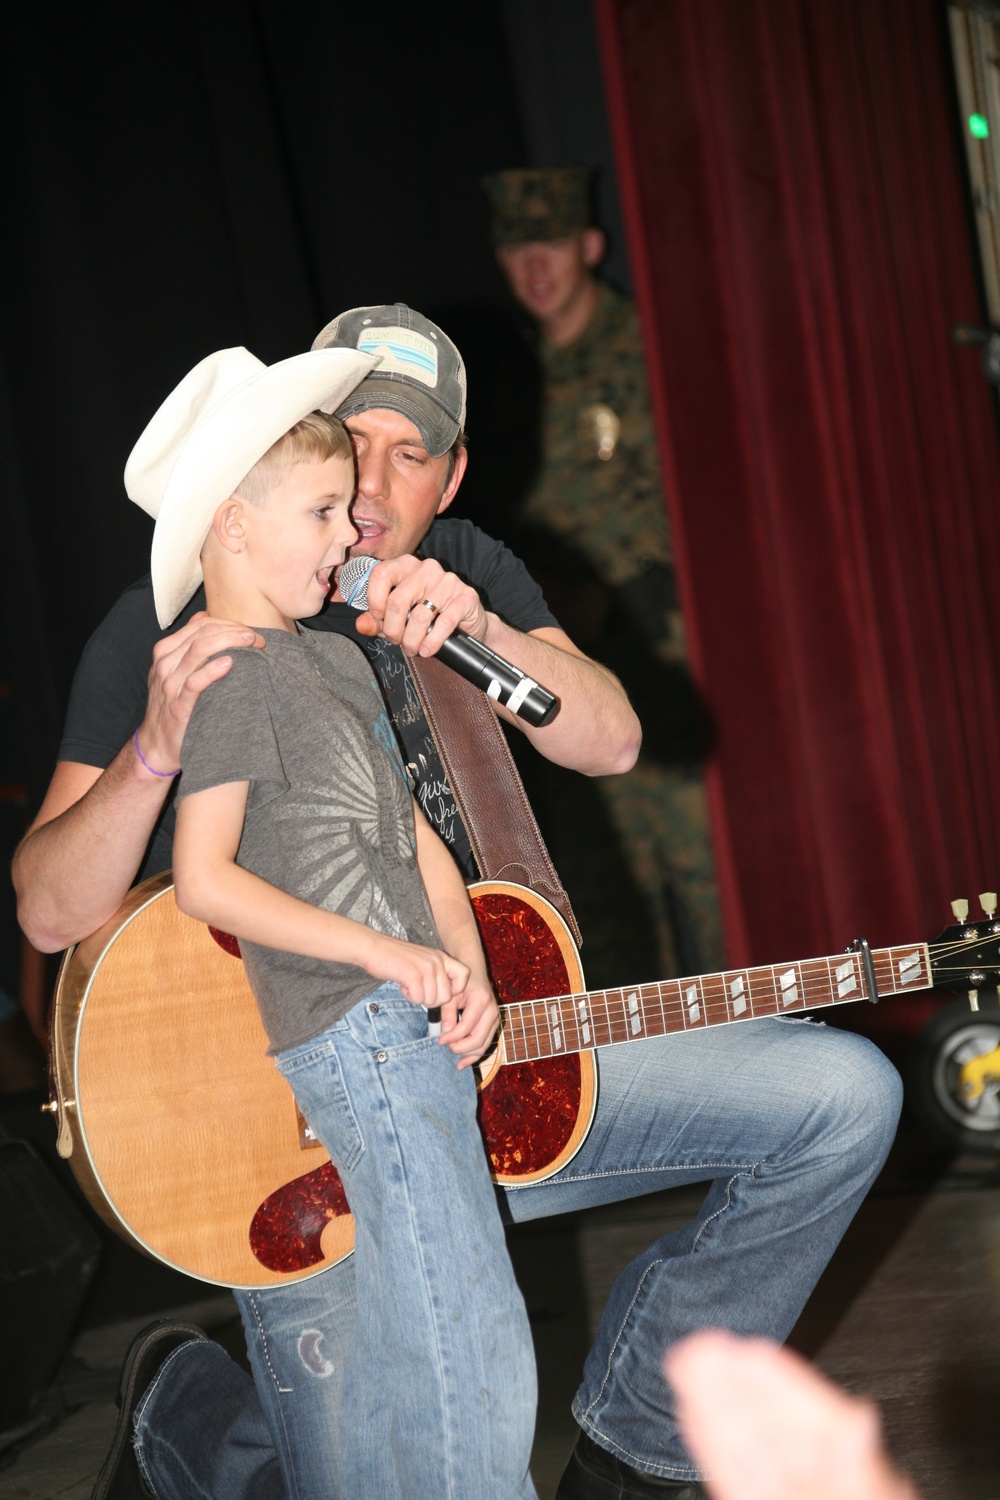 Get your boots on: Country stars shine at air station